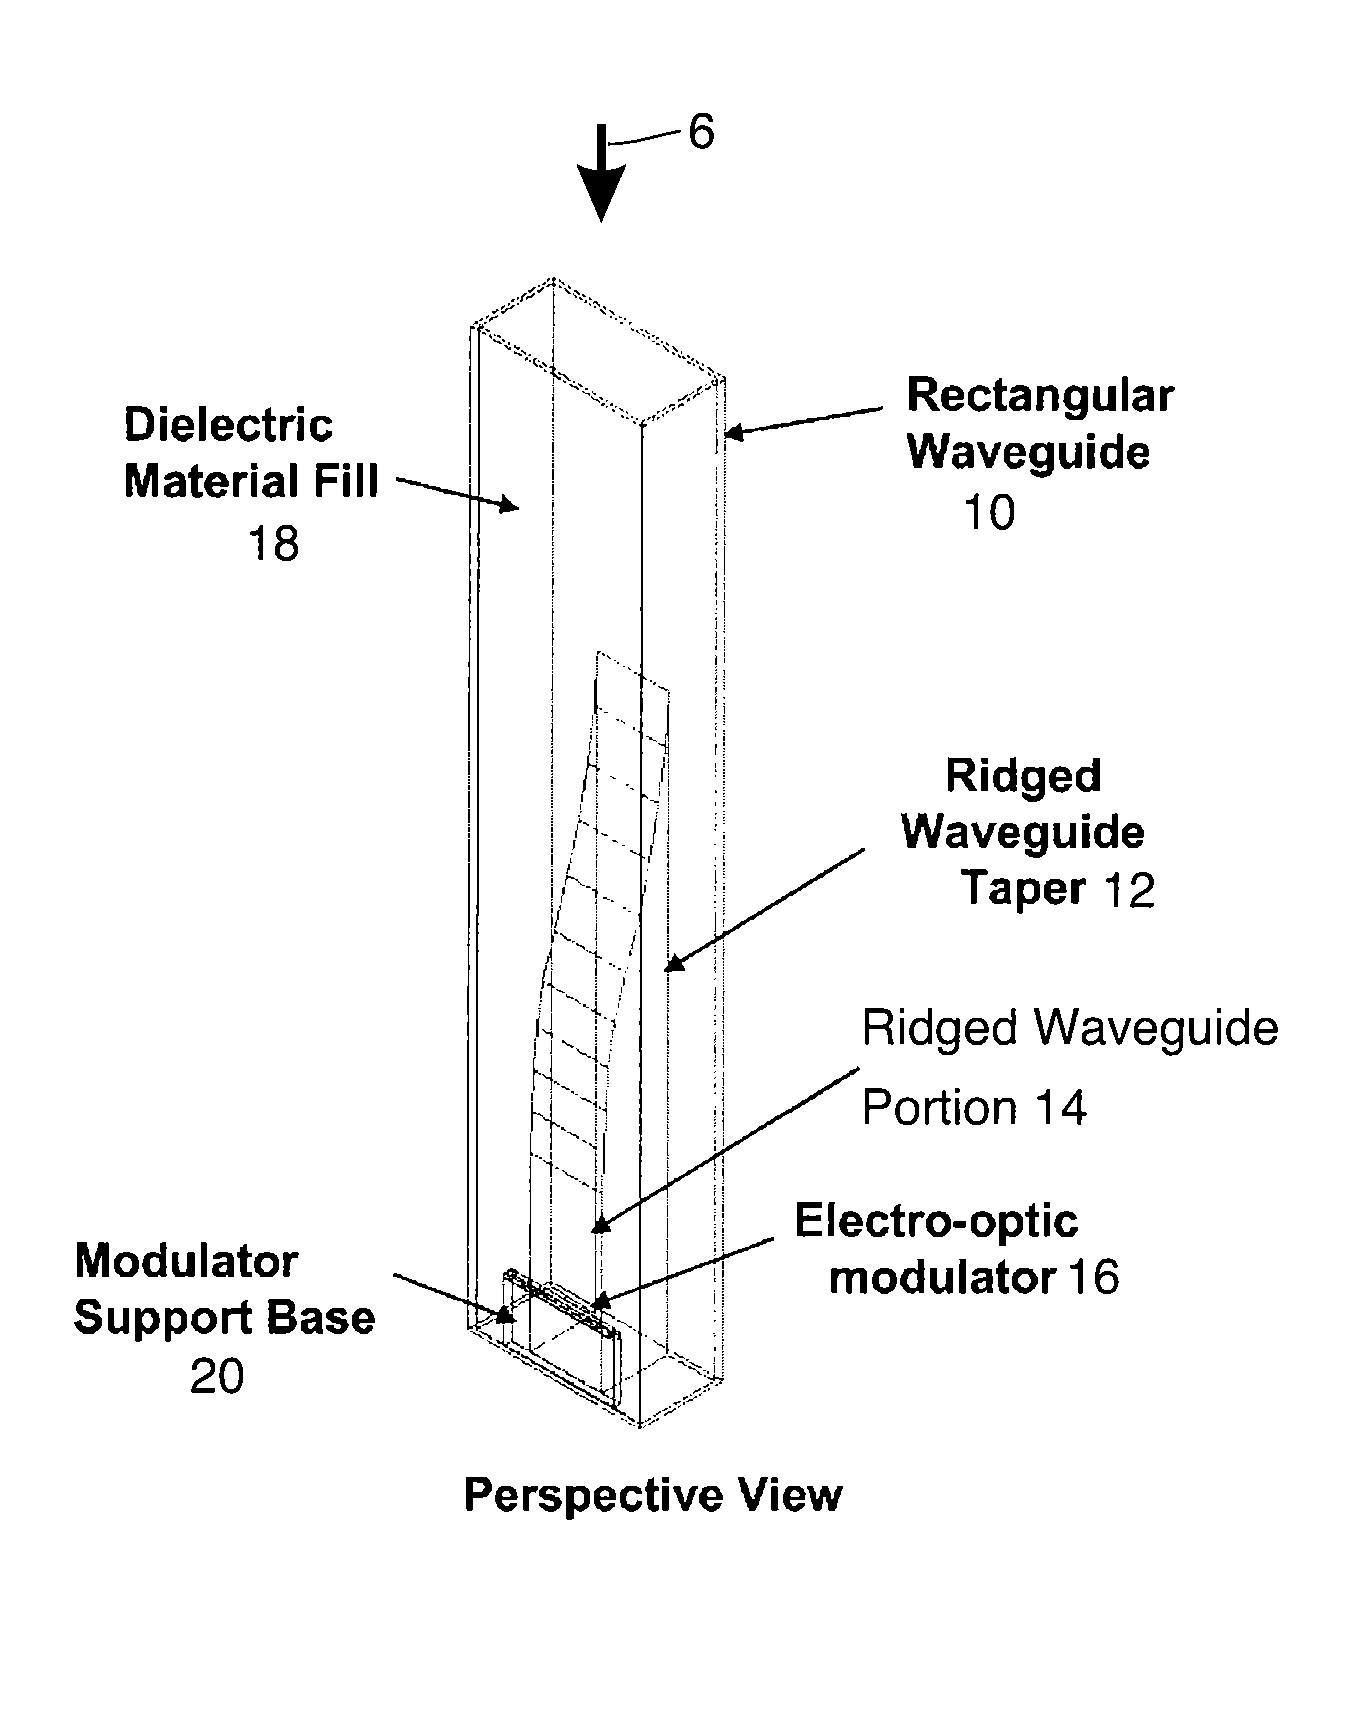 Waveguide assembly for a microwave receiver with electro-optic modulator